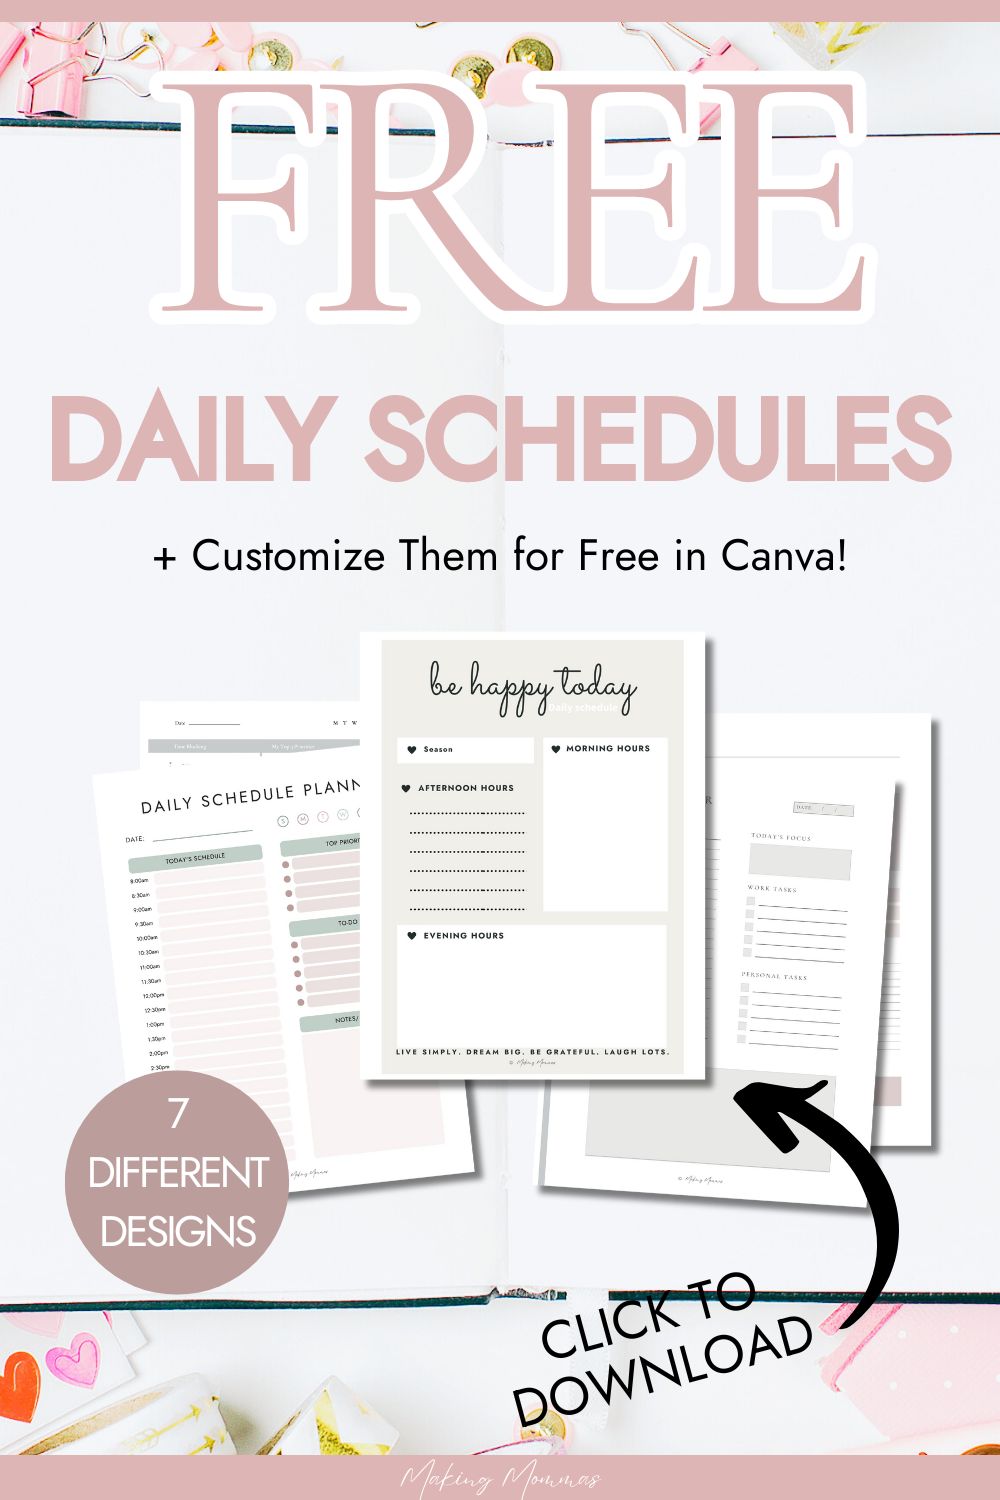 pin image reading Free daily schedules + customize them for free in Canva!